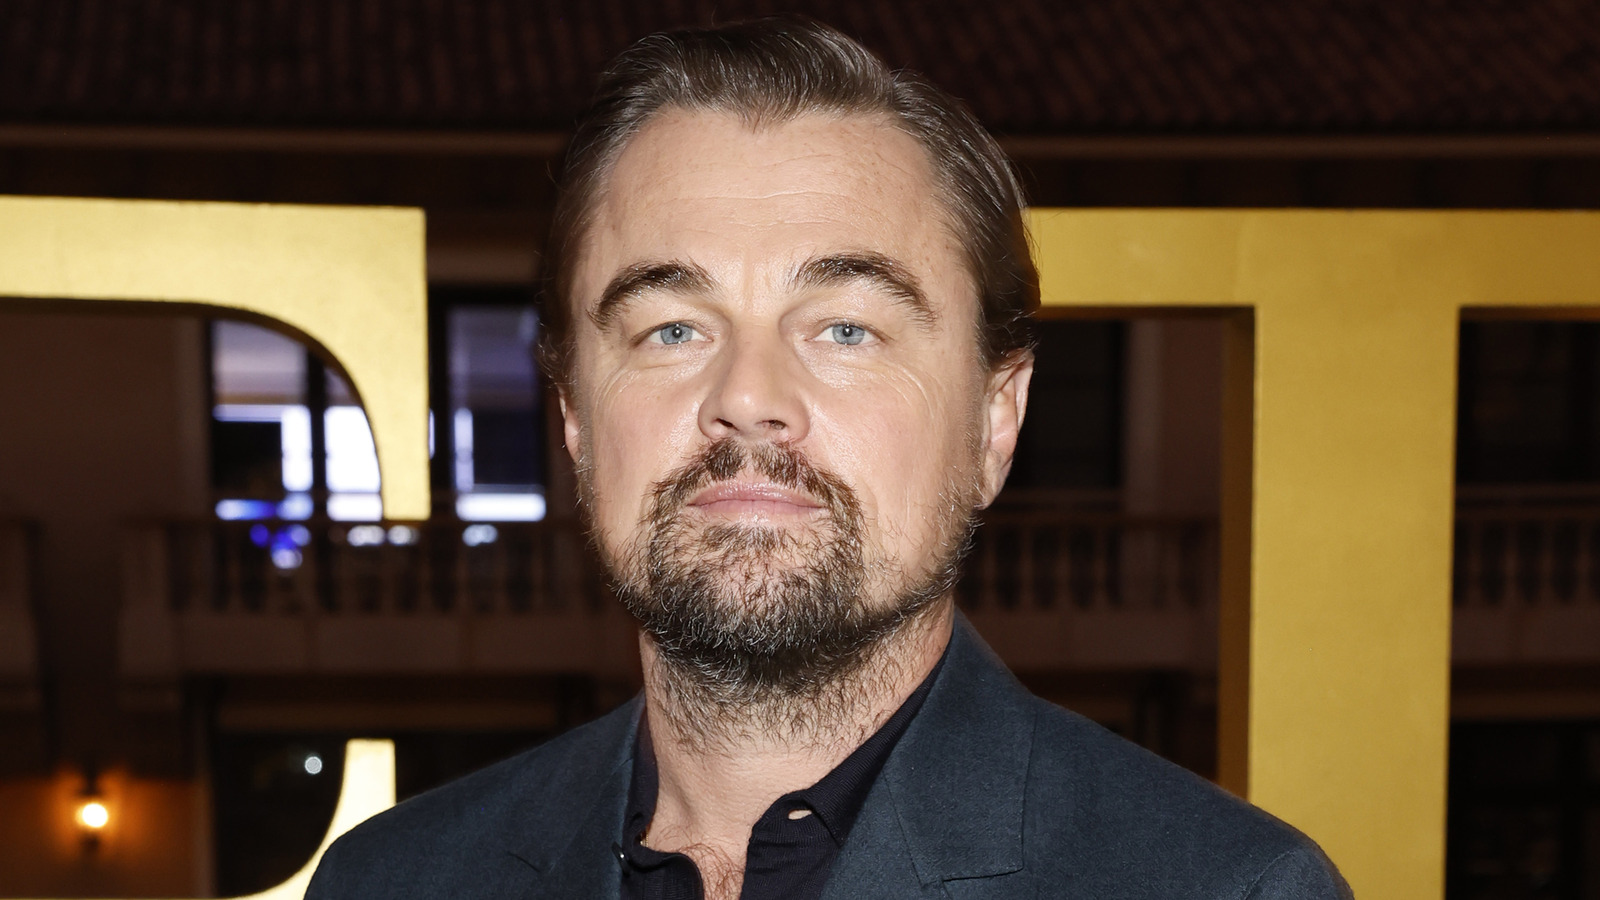 A Look At Leonardo DiCaprio's Past With Disgraced Nickelodeon Producer Brian Peck